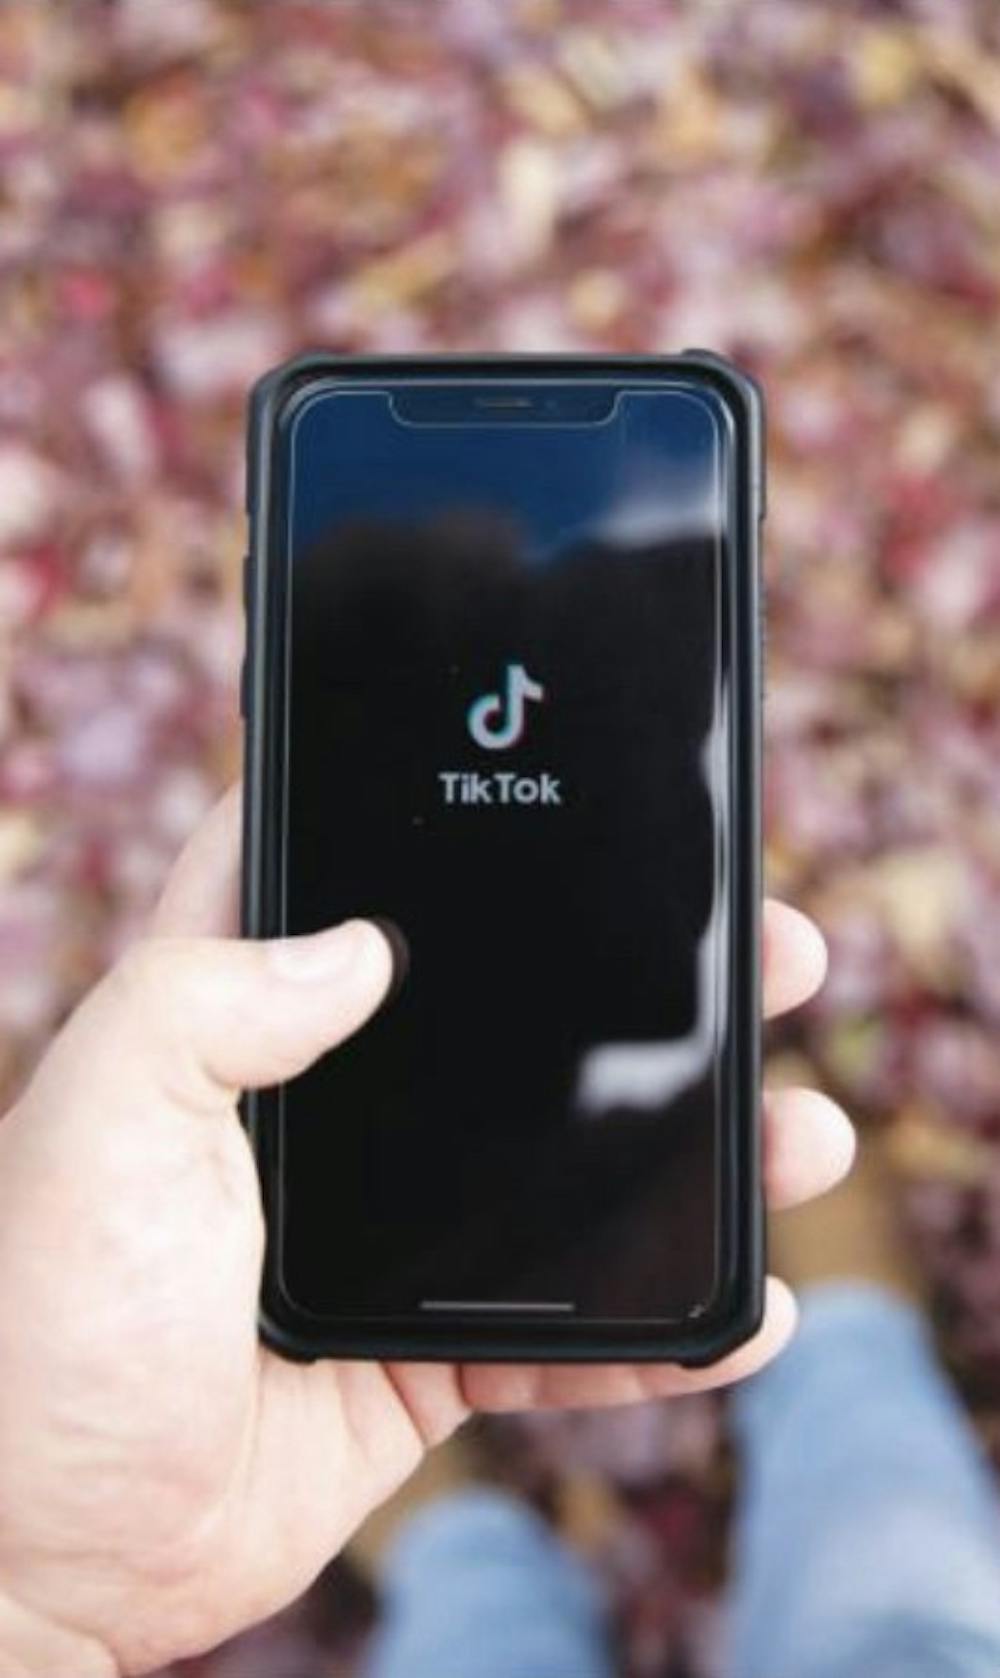 <p>A phone opens TikTok Nov. 10, 2020. TikTok has been downloaded more than 2 billion times in the Apple App Store and Google Play Store. <strong>Jacob Musselman, DN Illustration</strong></p>